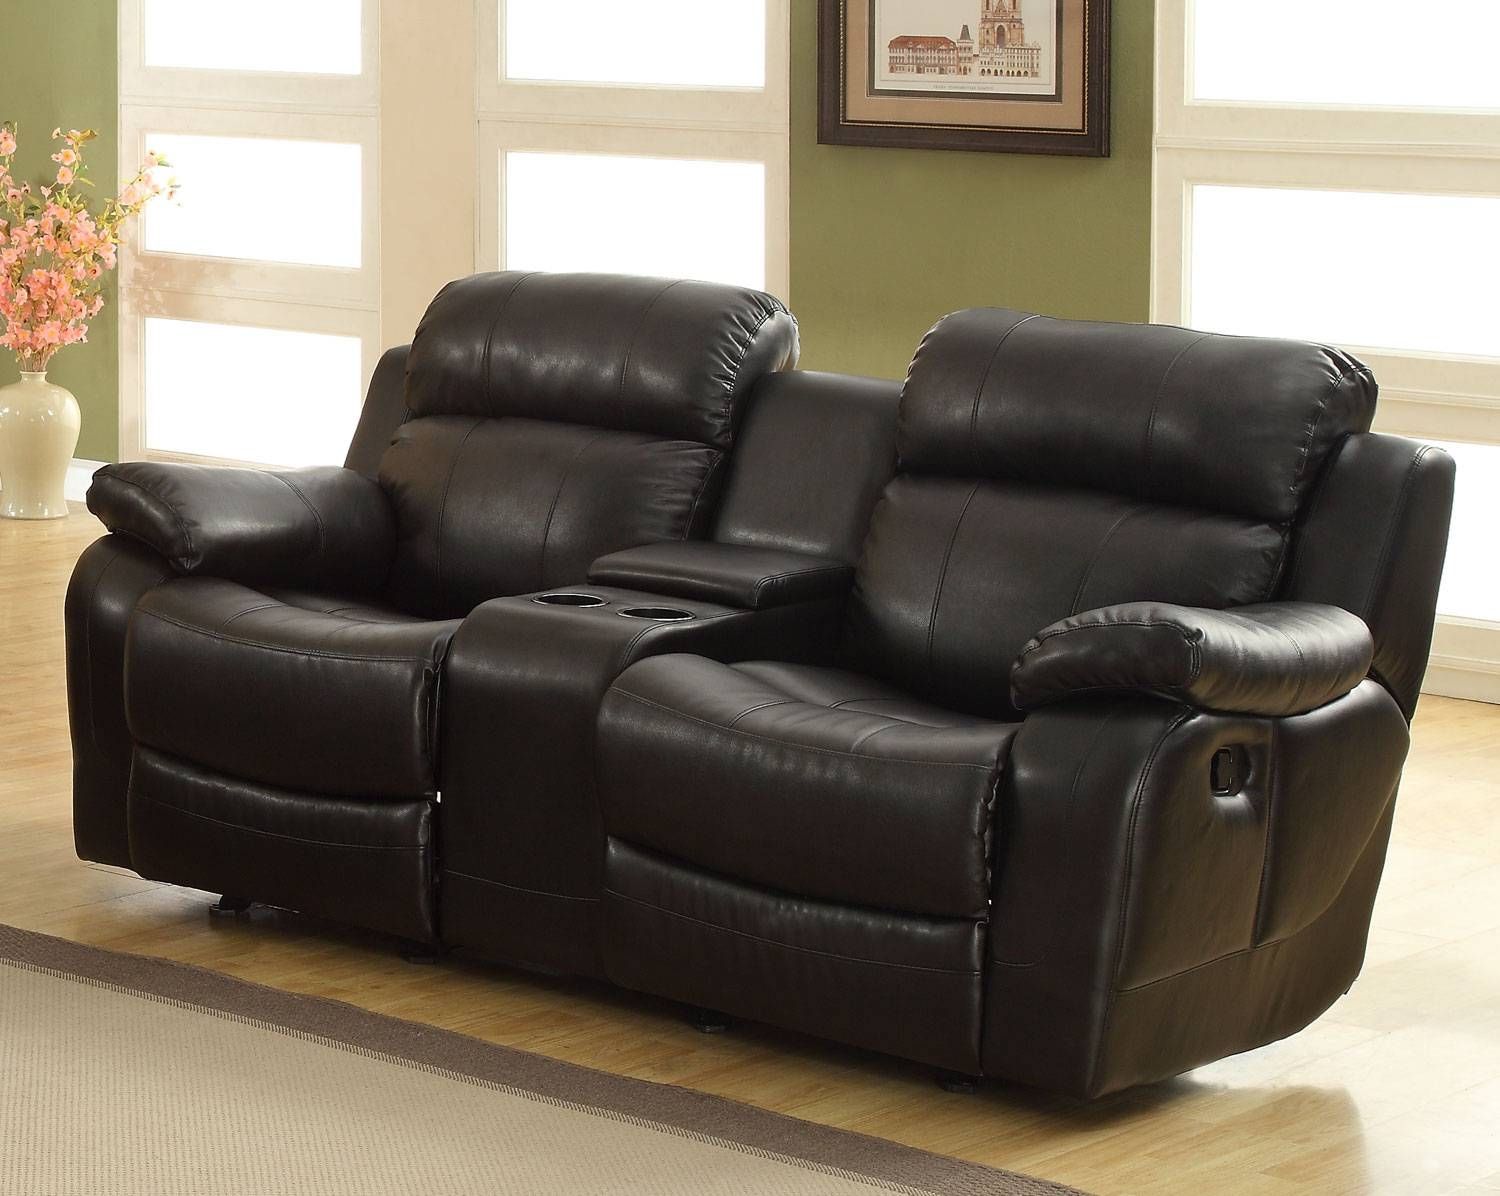 Furniture: Enjoy Your Time With Cozy Rocking Recliner Loveseat With Regard To Rocking Sofa Chairs (View 30 of 30)